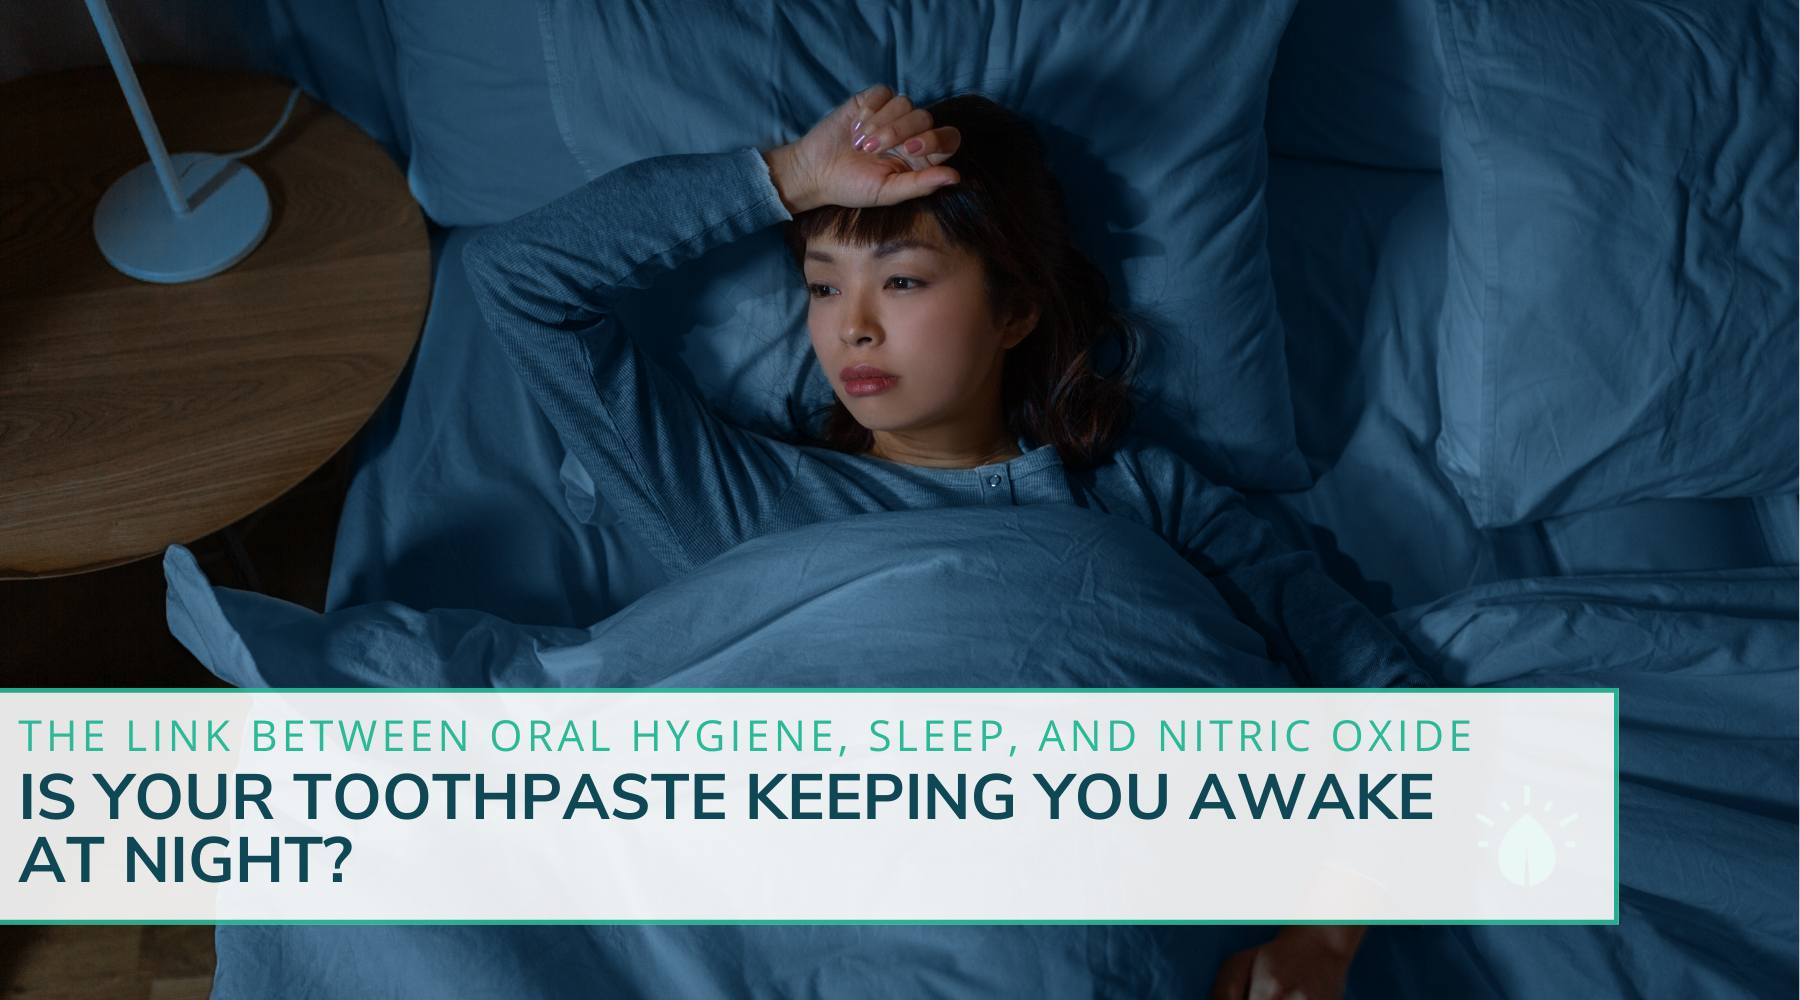 Is Your Toothpaste Keeping You Awake At Night? The Link Between Oral Hygiene, Sleep, And Nitric Oxide